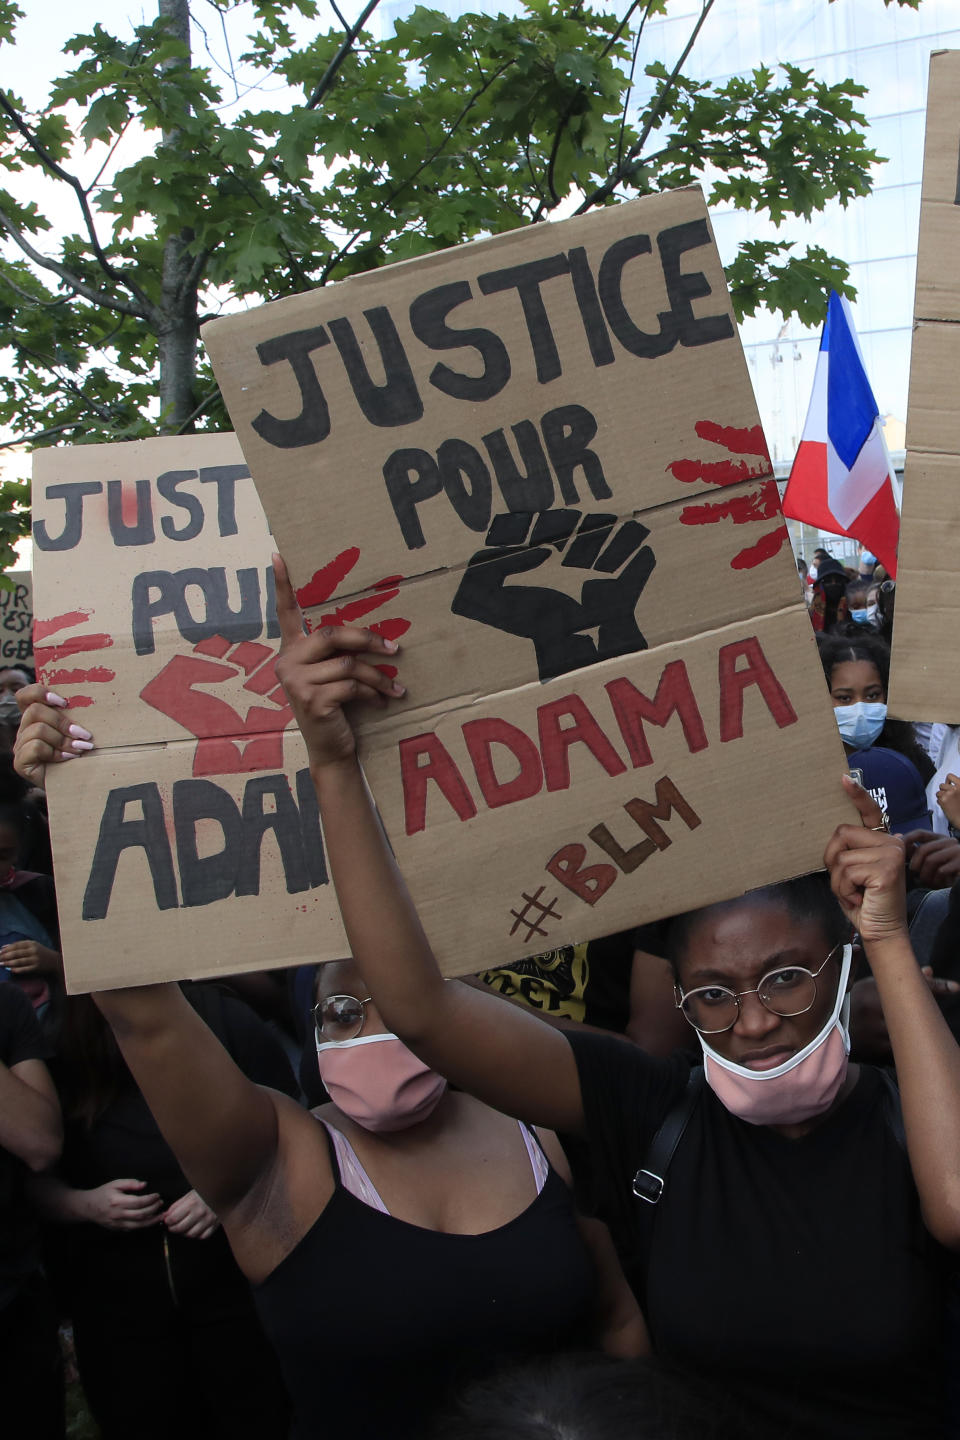 Anti-racism protests take place worldwide